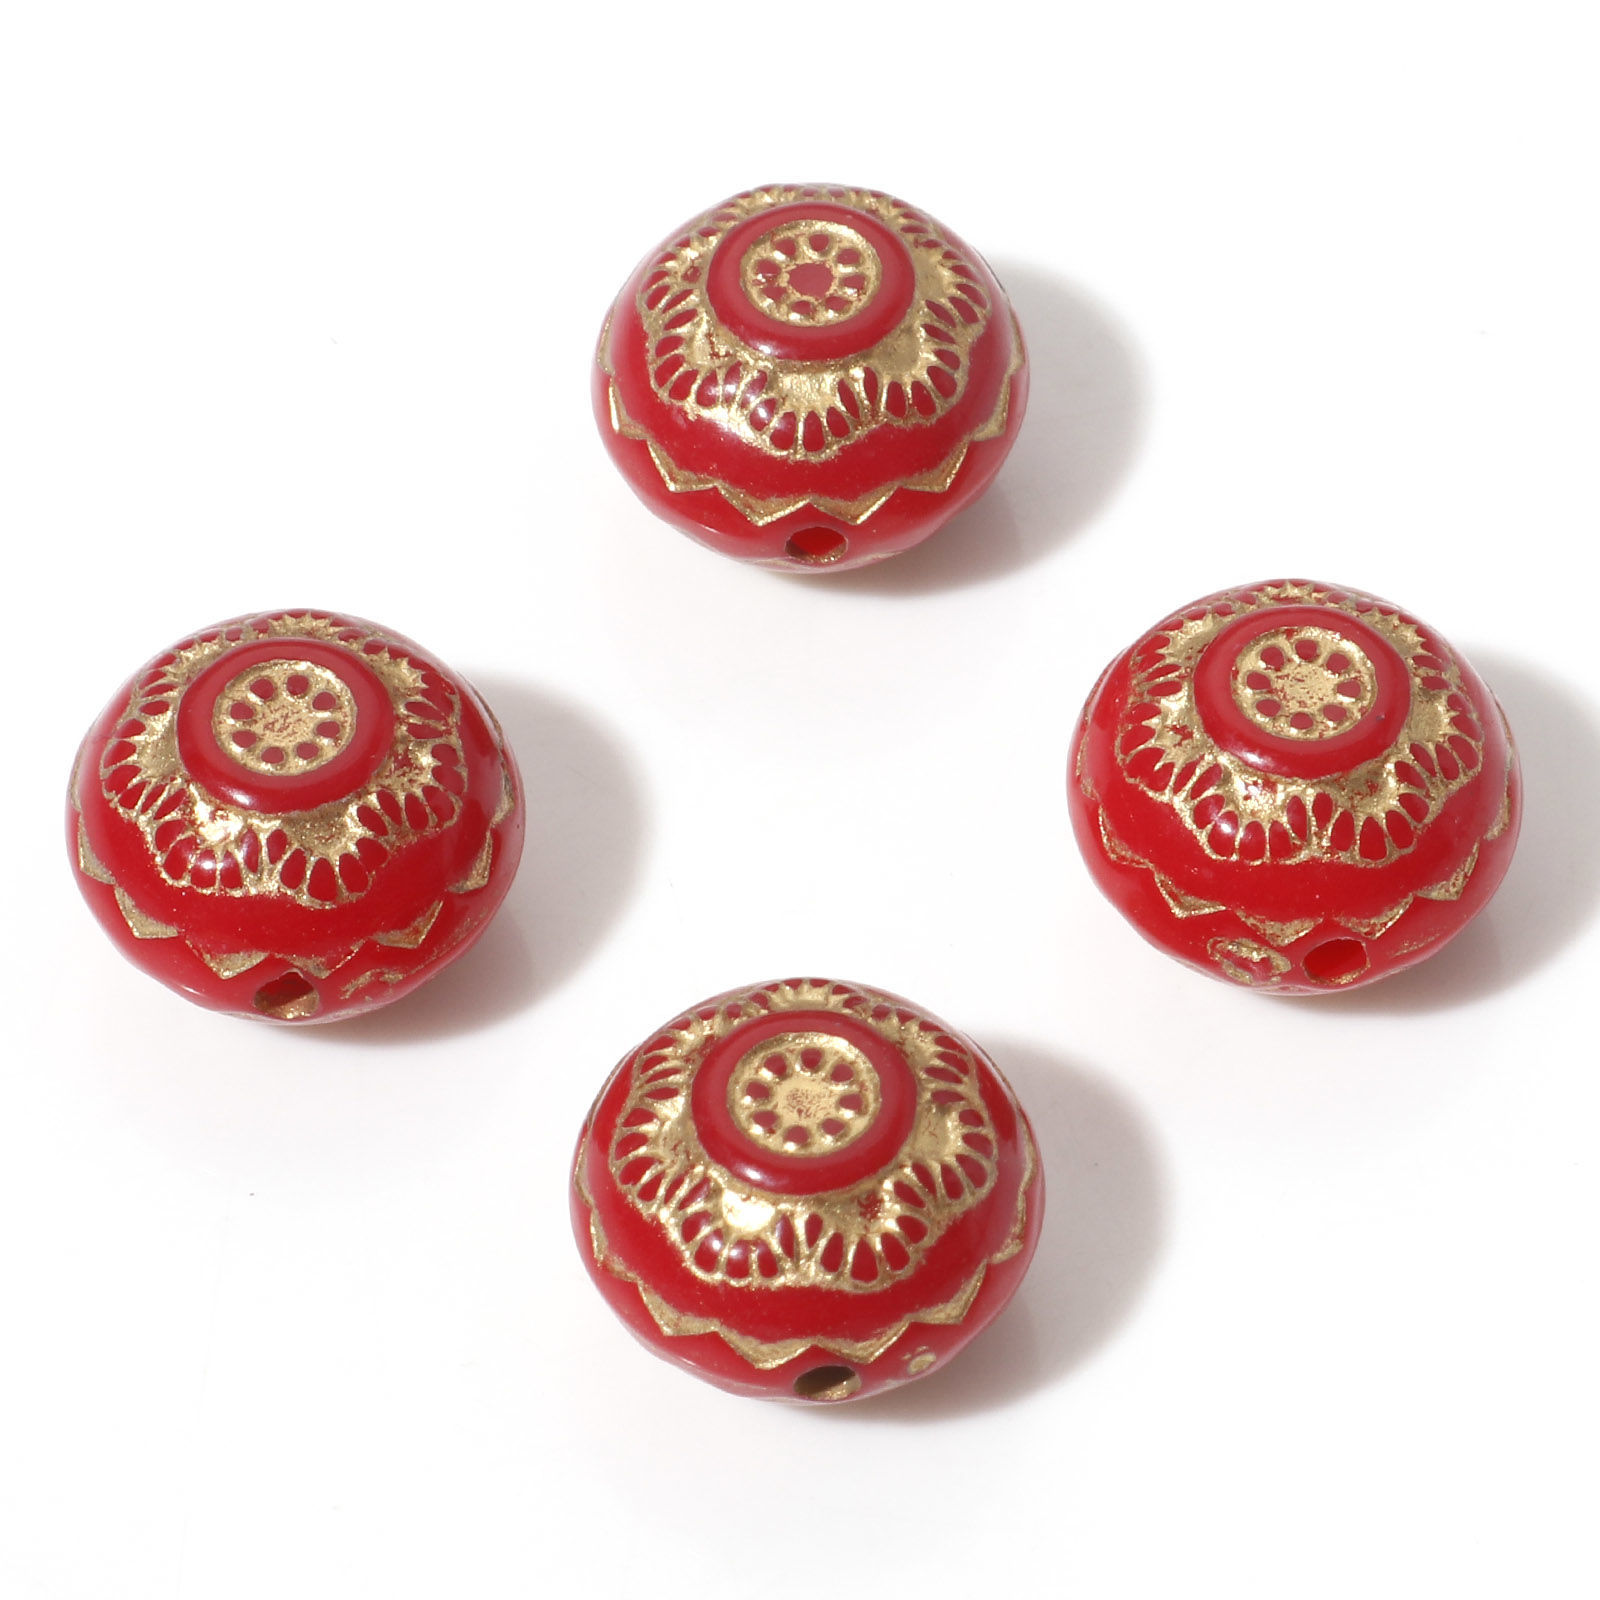 Picture of Acrylic Retro Beads Red Metallic Round Flower About 13mm Dia., Hole: Approx 1.5mm, 10 PCs